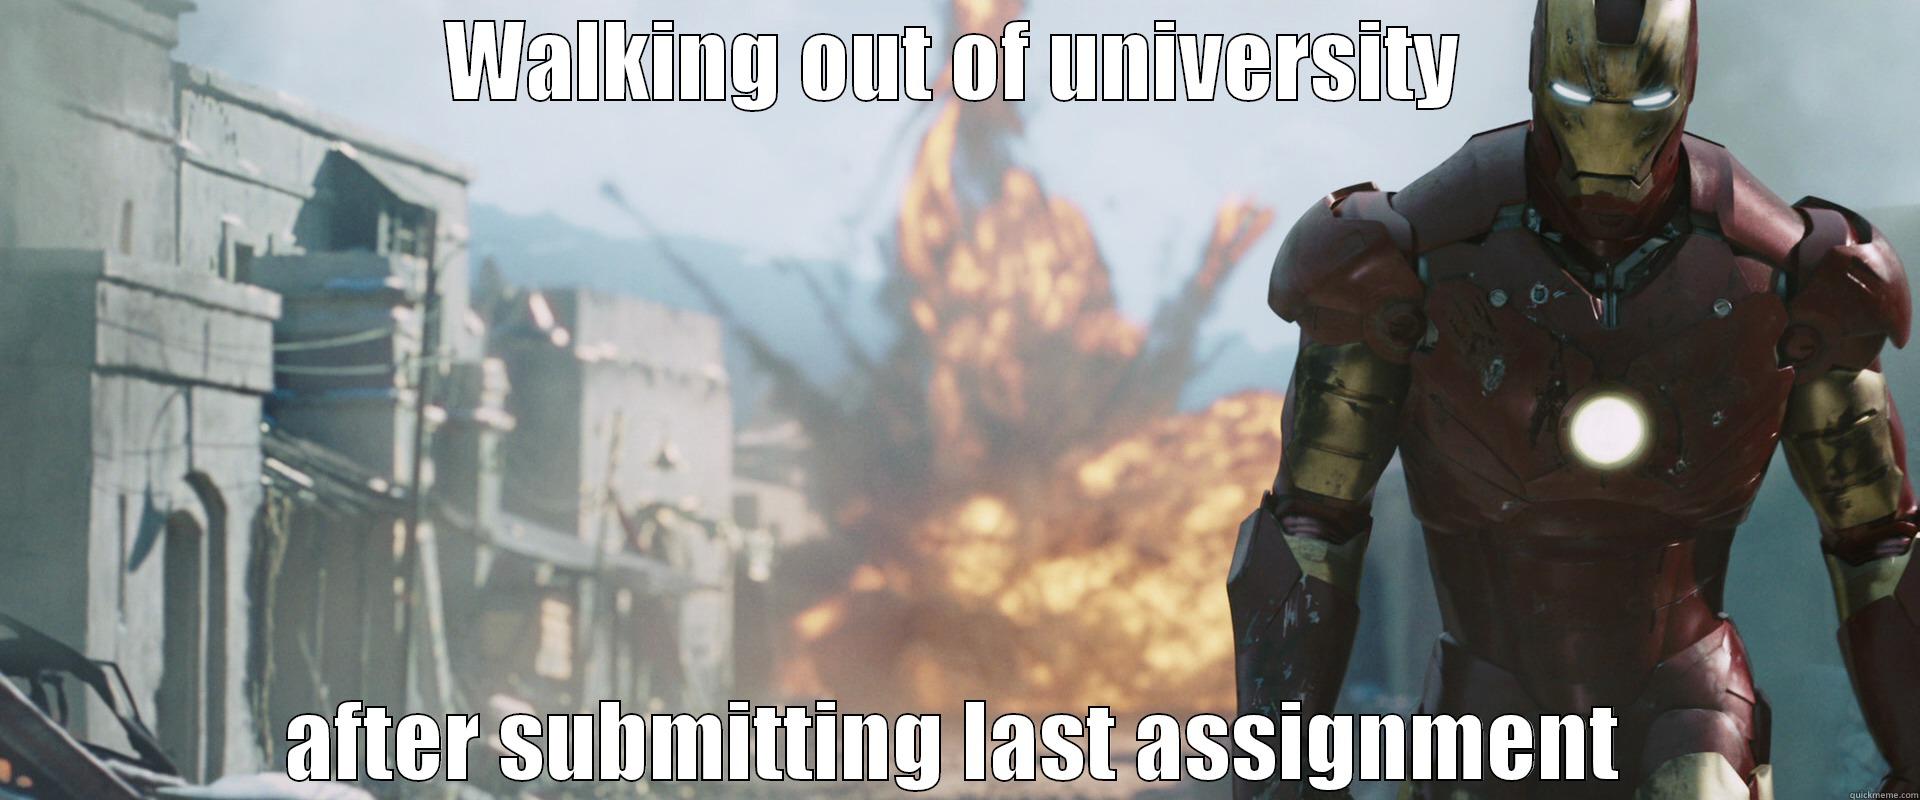 Last assignment submitted - WALKING OUT OF UNIVERSITY AFTER SUBMITTING LAST ASSIGNMENT Misc